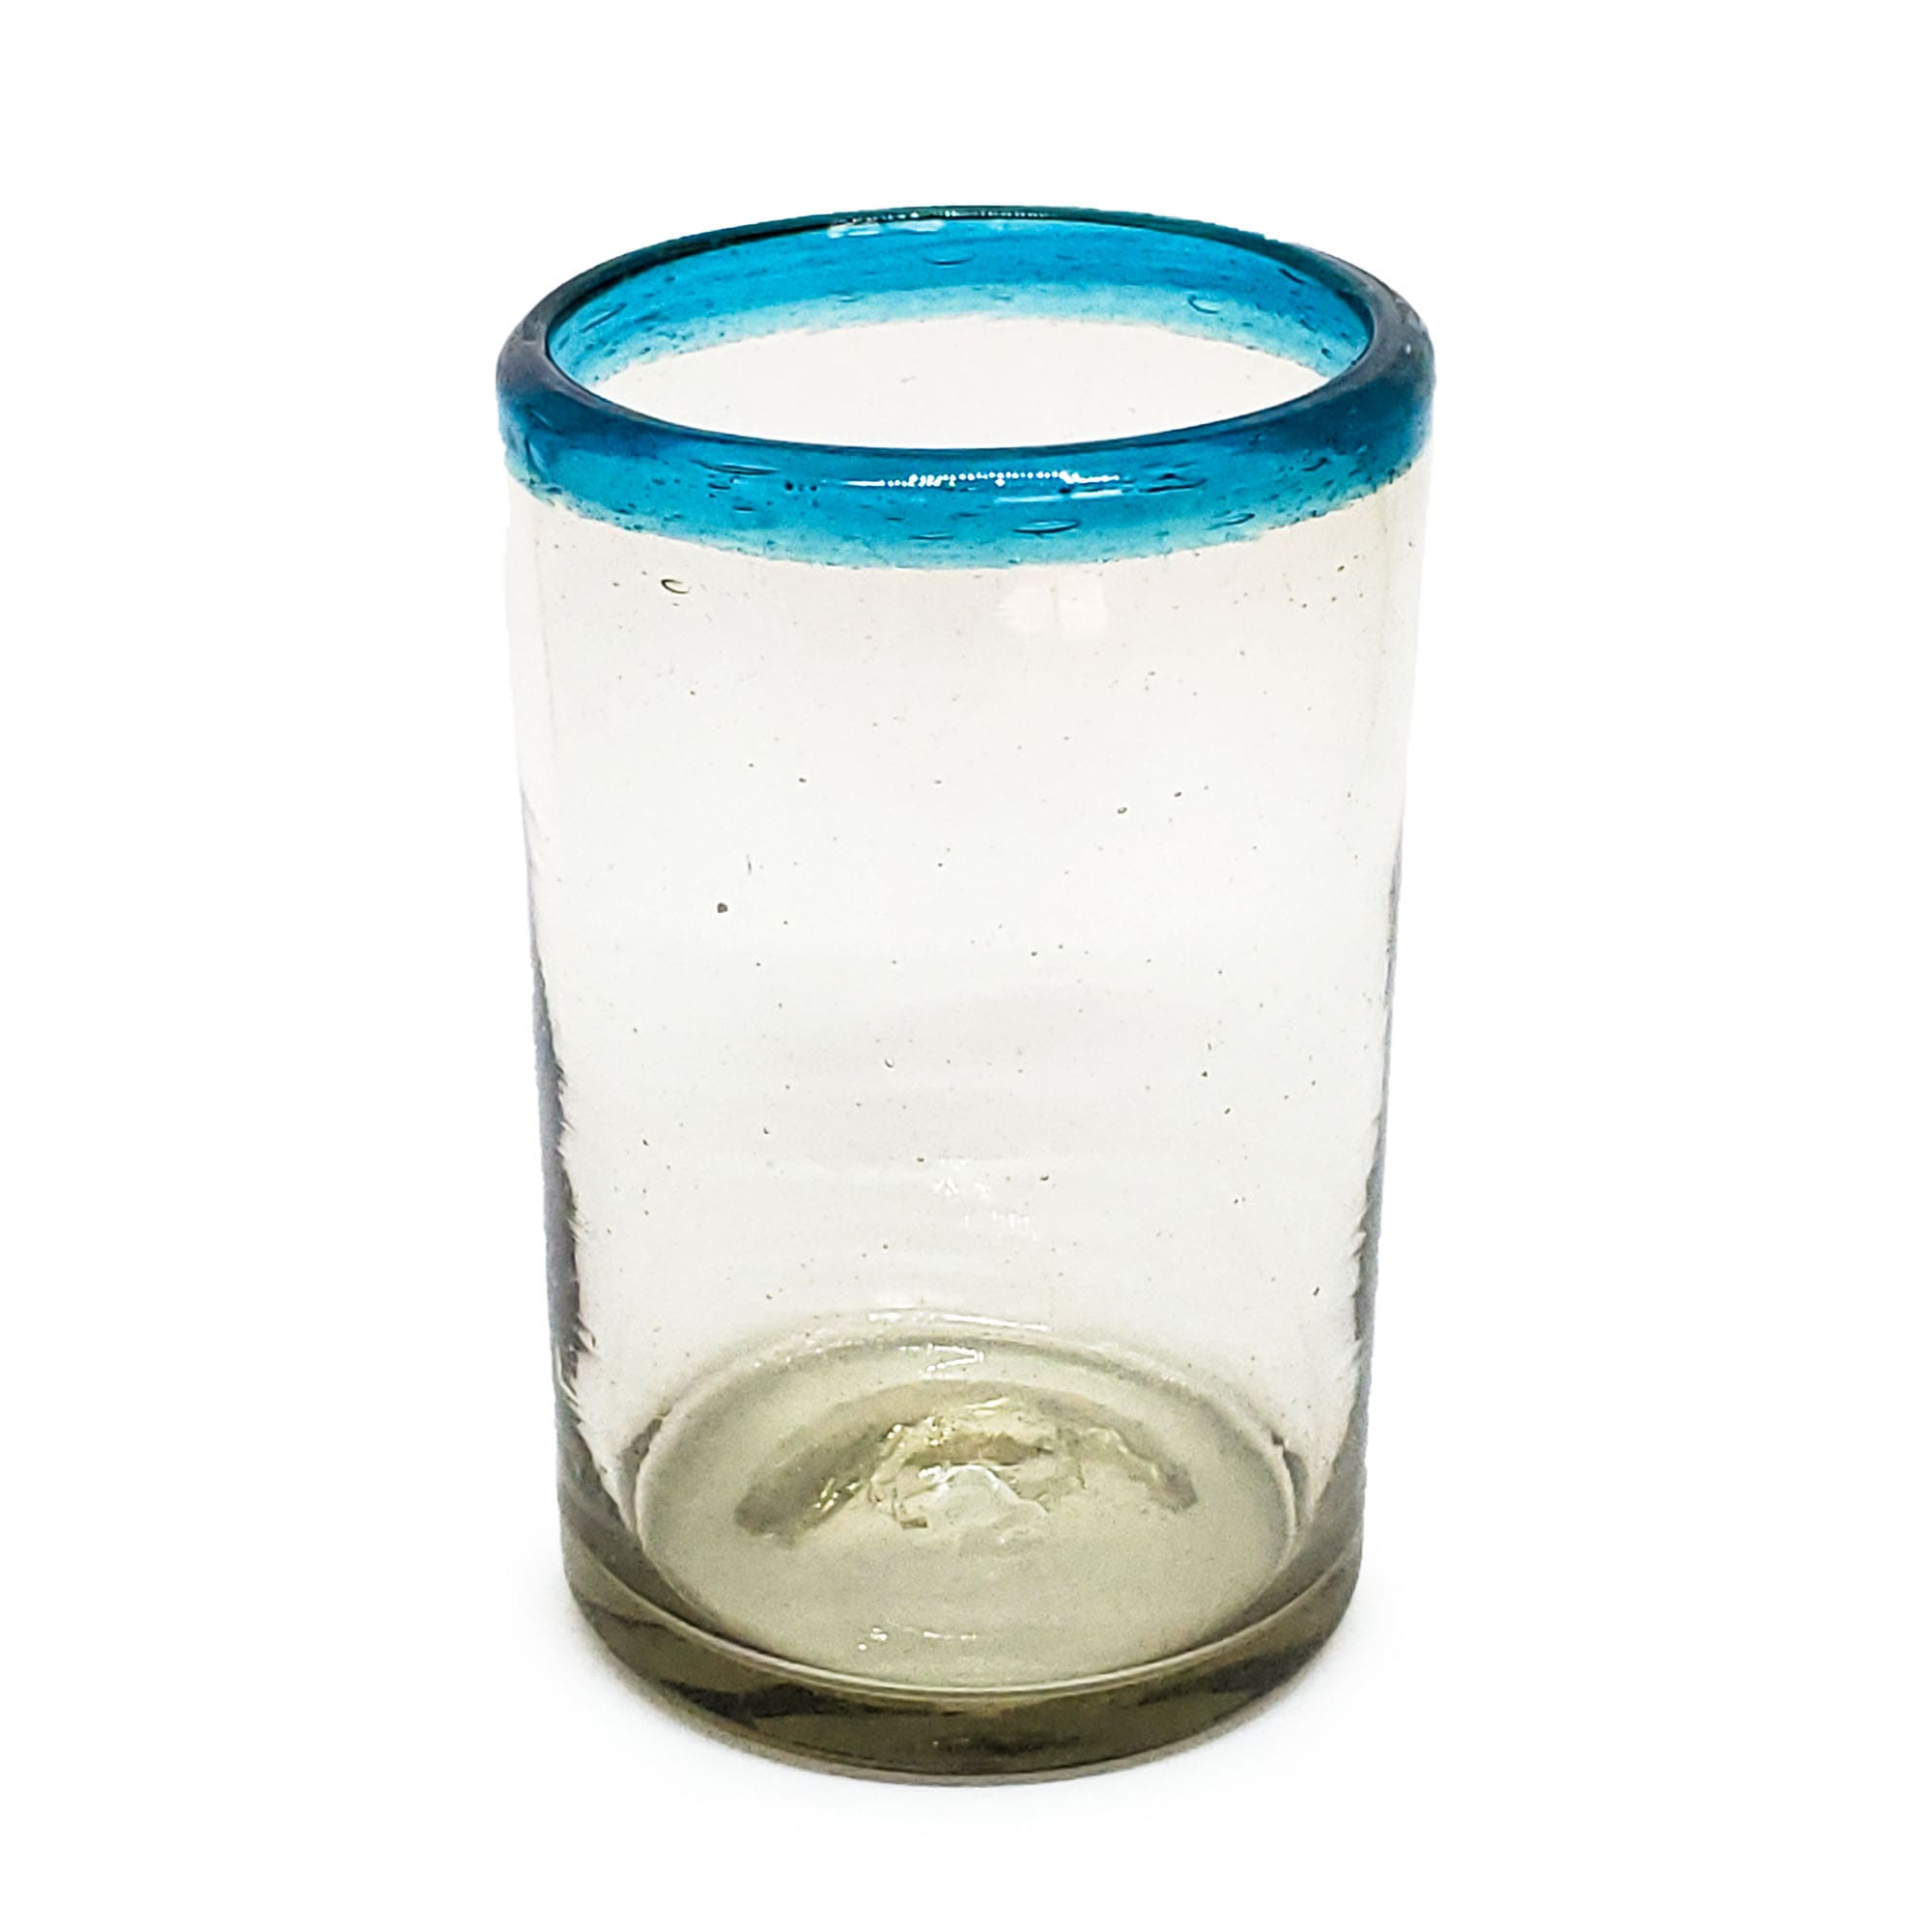 Wholesale Colored Rim Glassware / Aqua Blue Rim 14 oz Drinking Glasses  / These glasses are sure to embelish any table setting, with their aqua blue decor.<br>1-Year Product Replacement in case of defects (glasses broken in dishwasher is considered a defect).